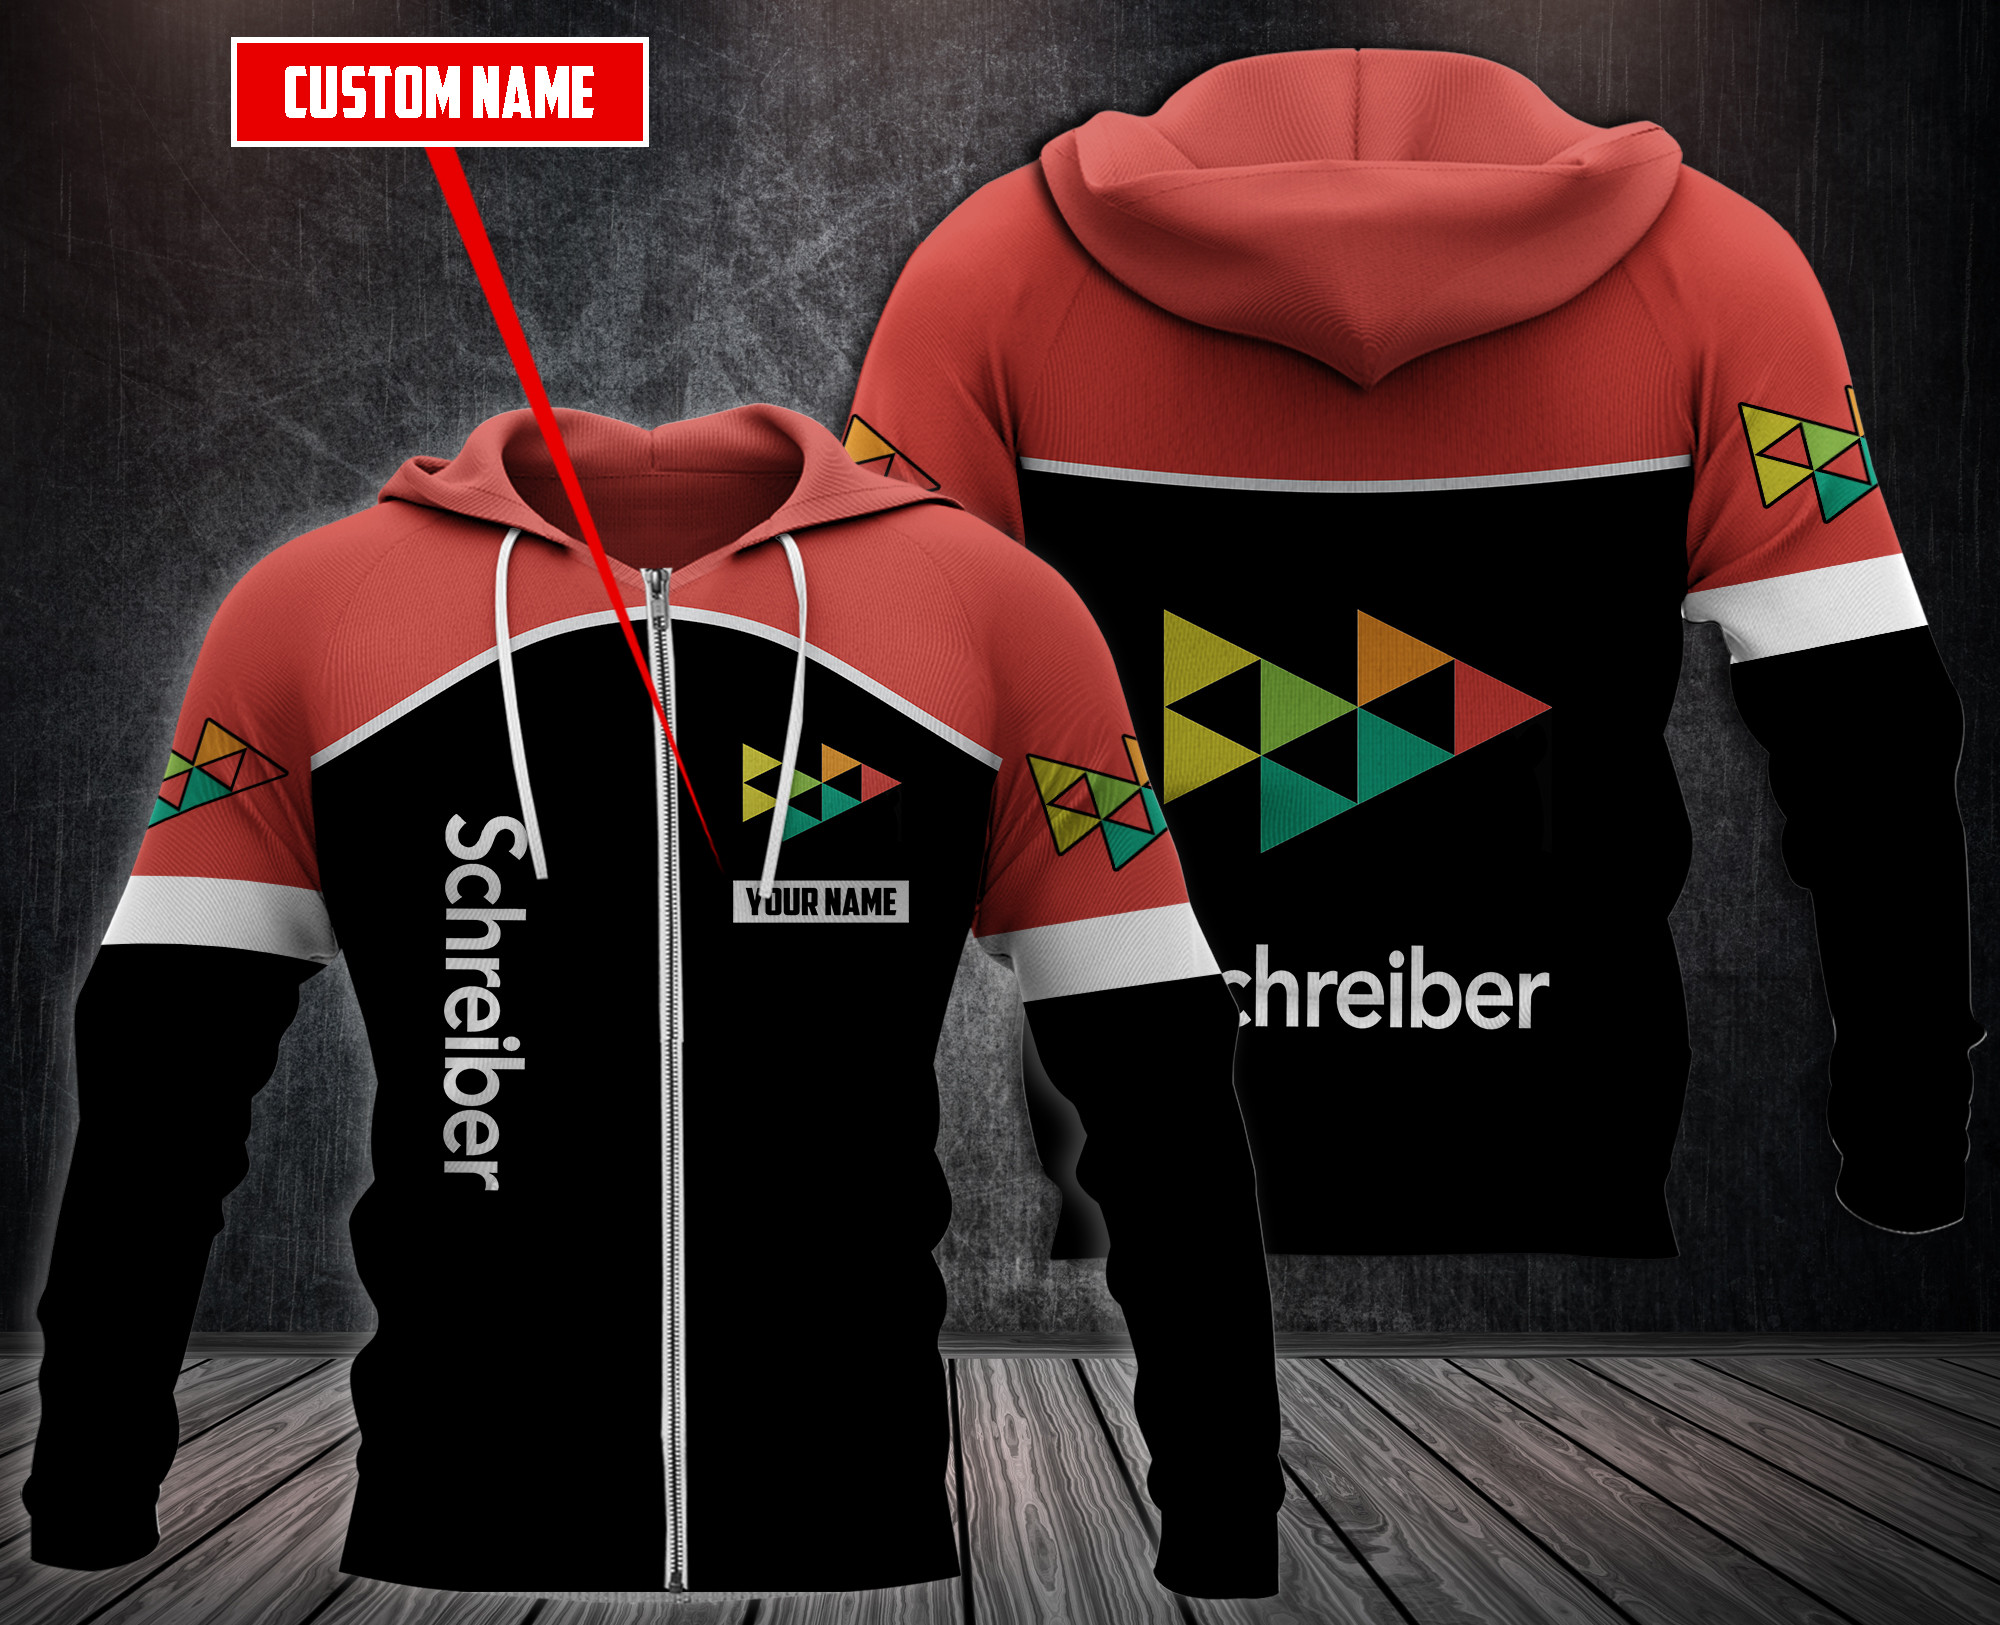 Choose the right hoodies for you on our boxboxshirt and ethershirt websites in 2022 135